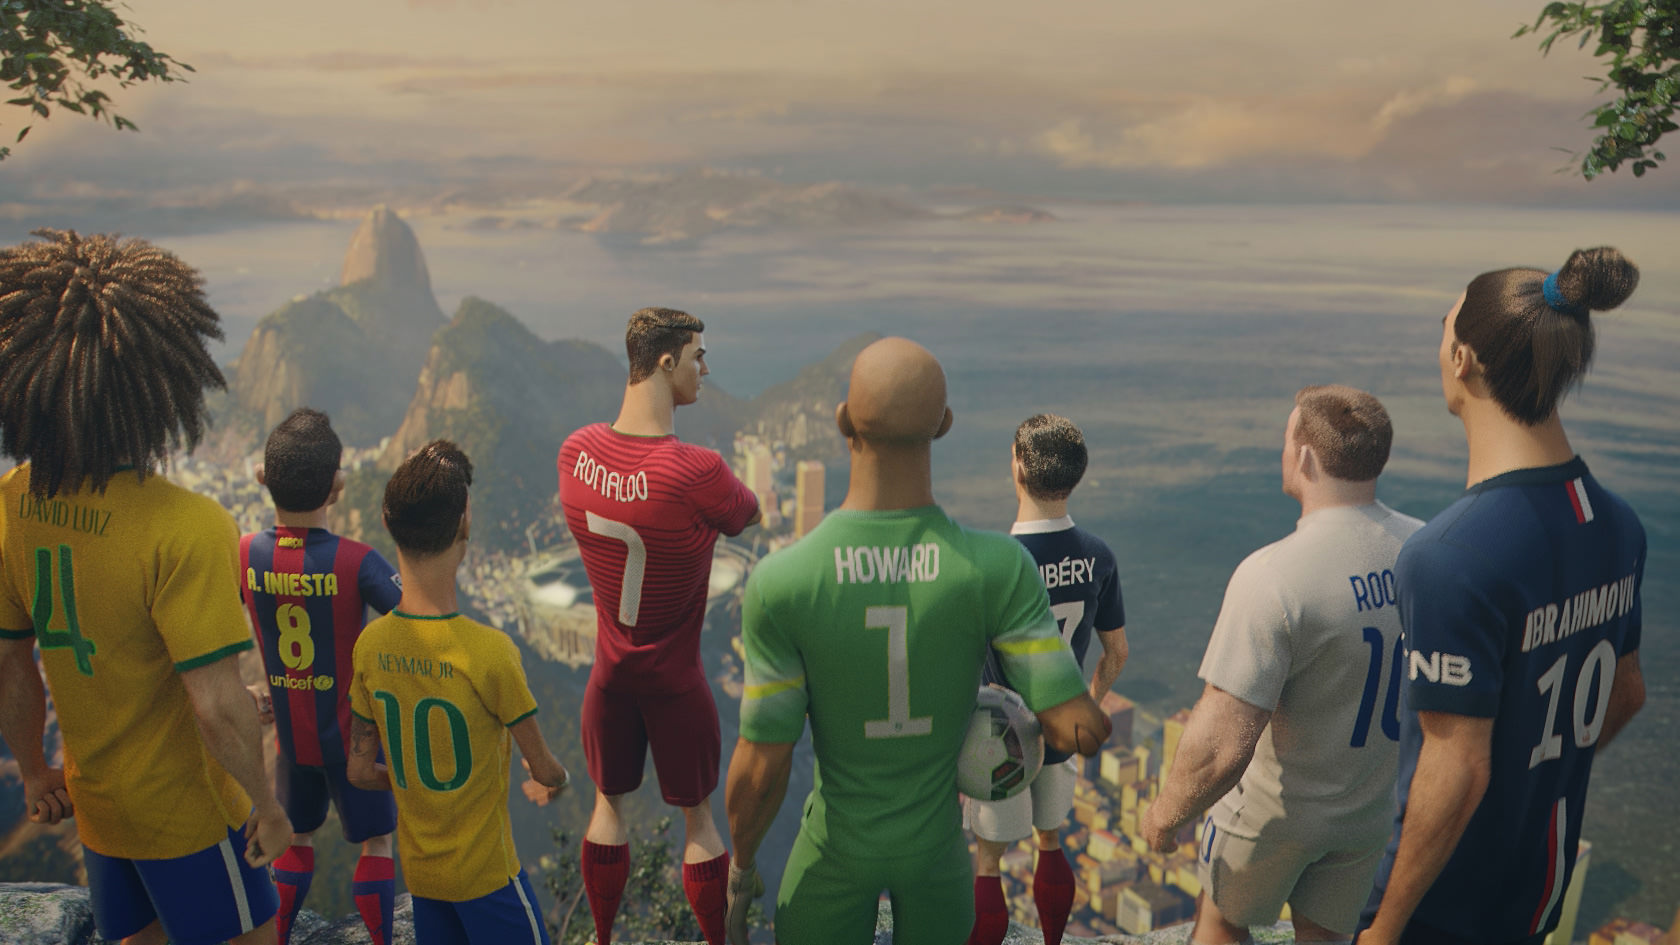 “The Last Game”: Wieden+Kennedy creates an animated short film for Nike